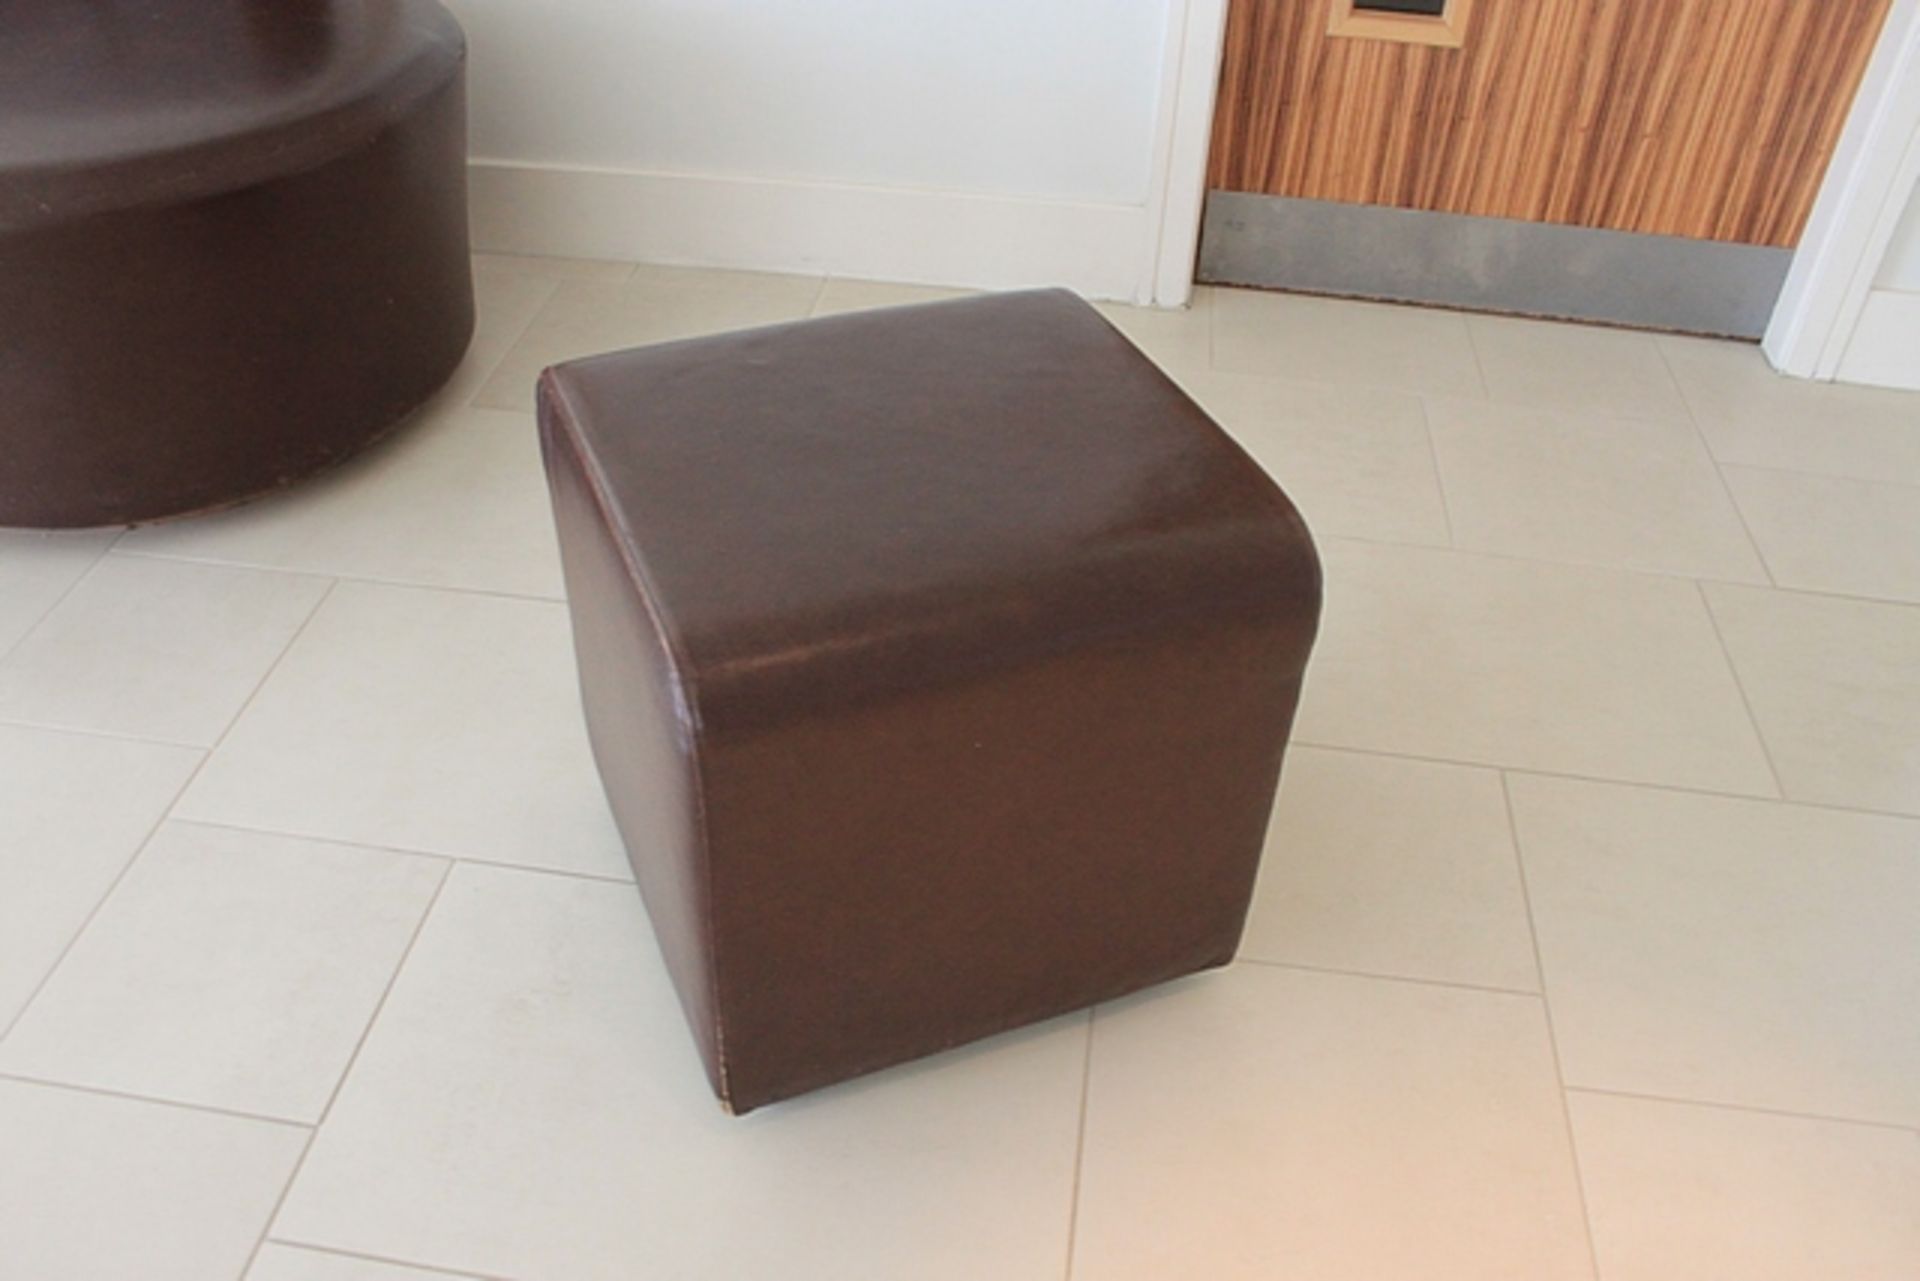 2  x Cube Brown Leather Stool 450 X 450 X 480mm - Image 2 of 2